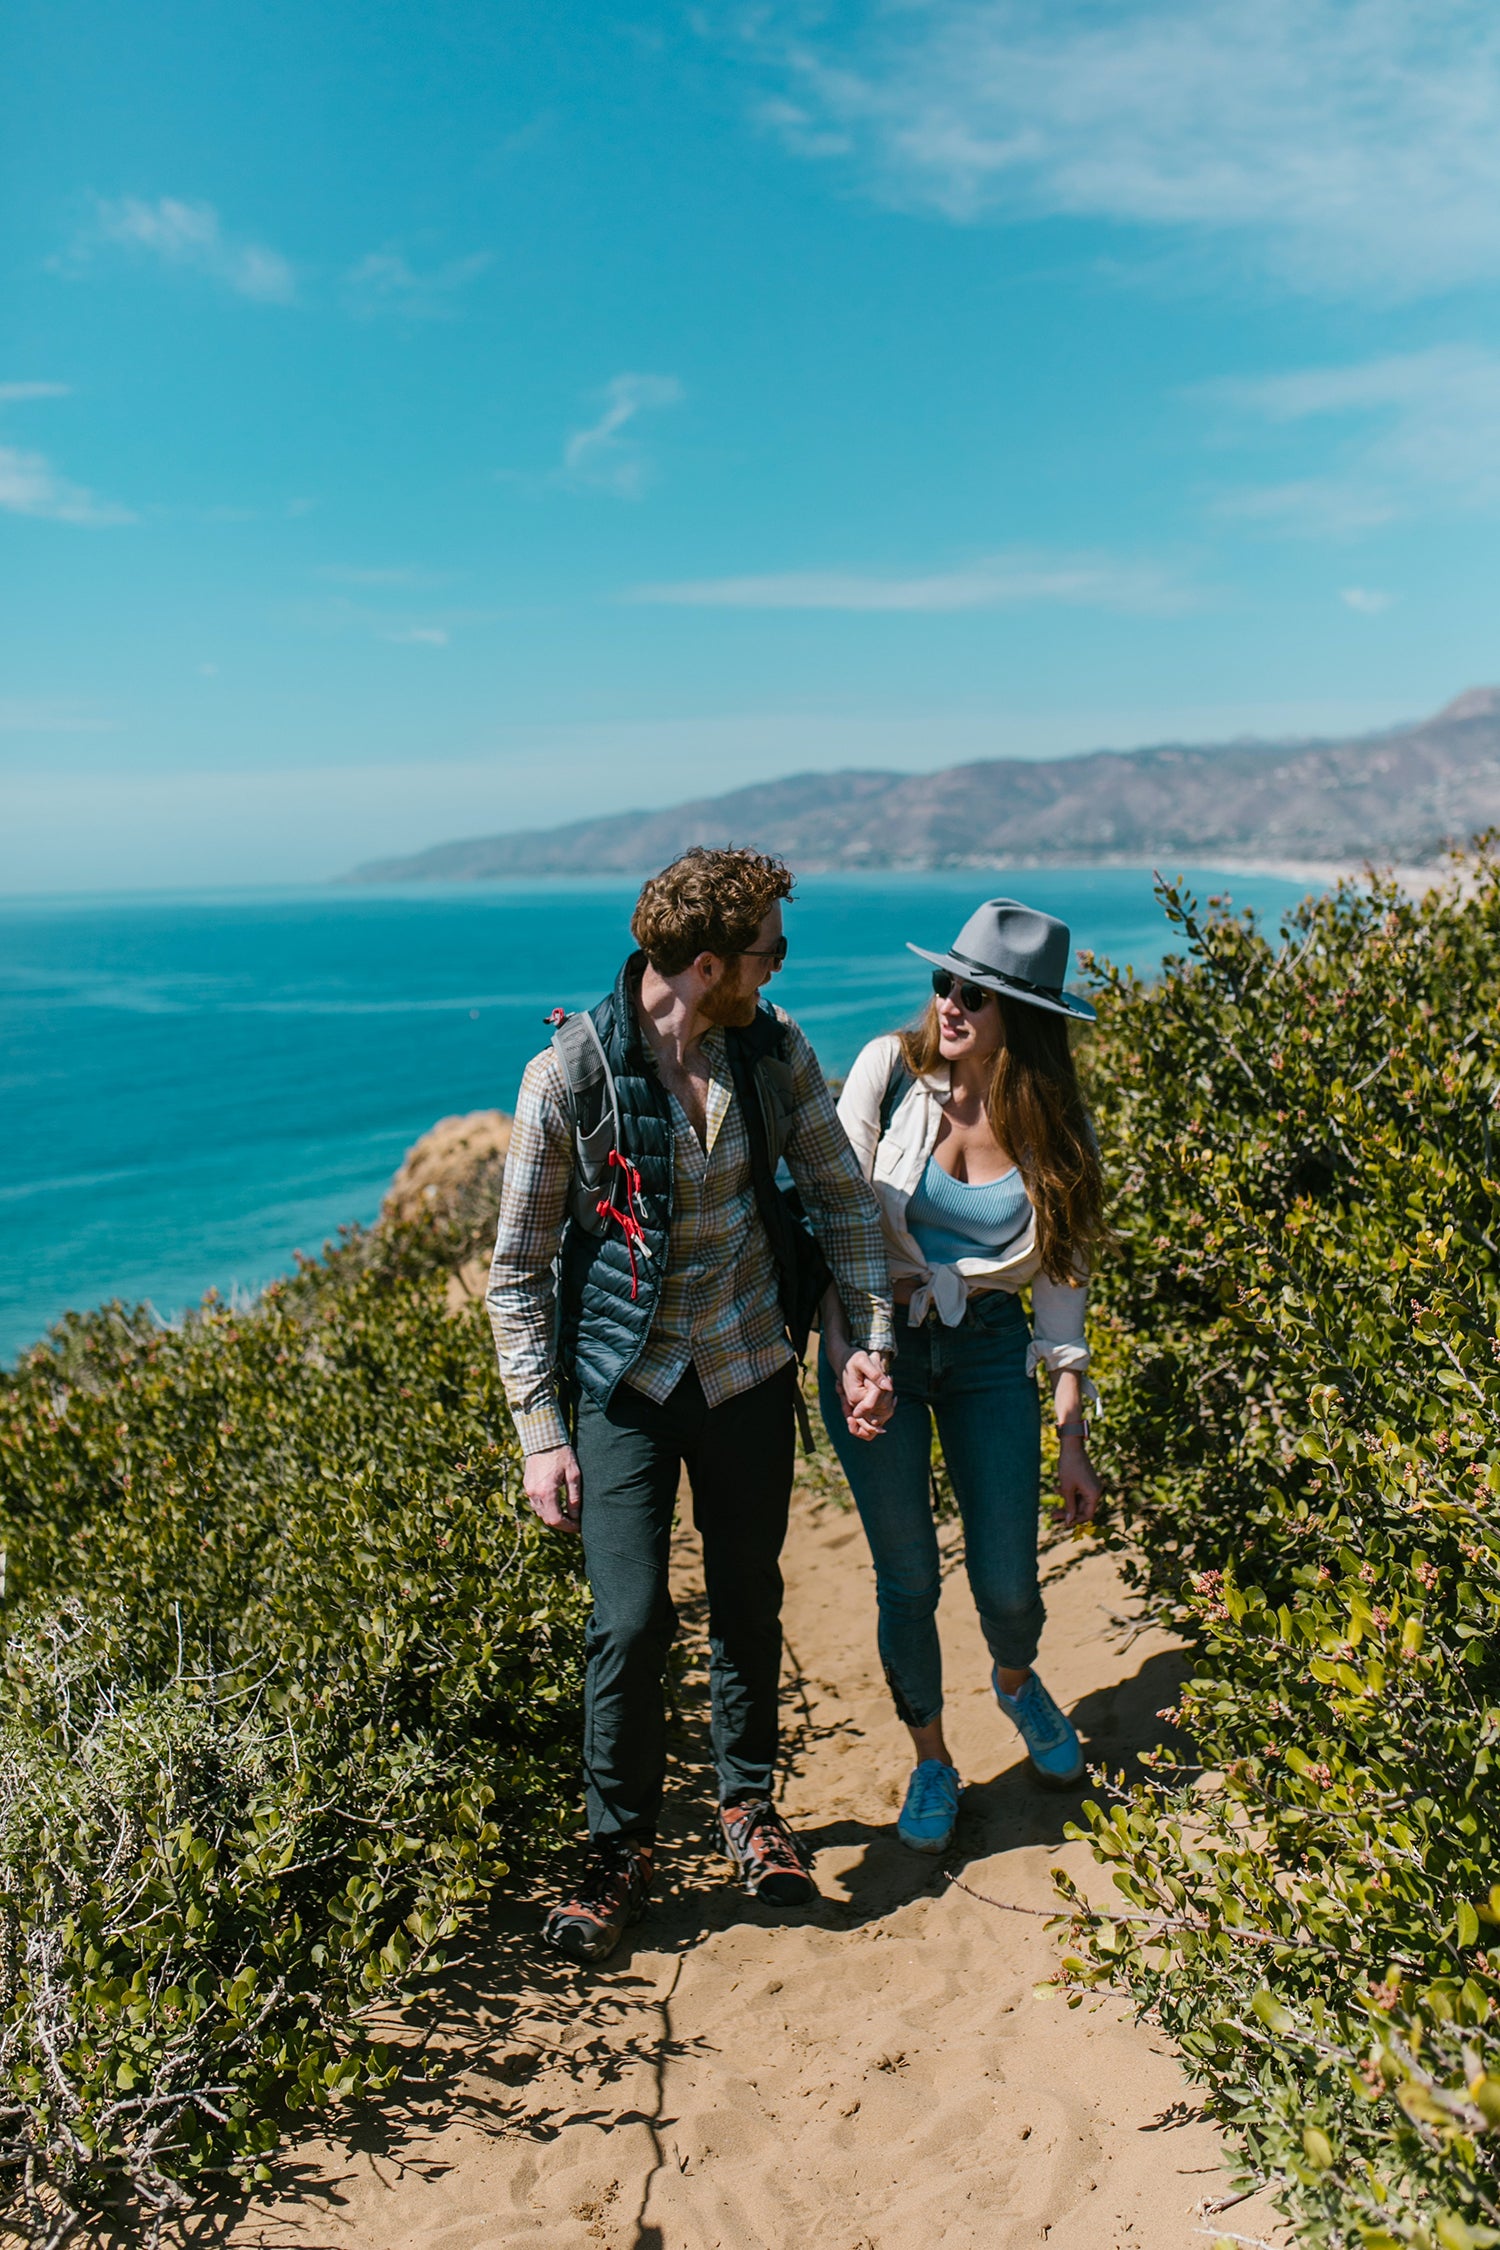 Go for a bushwalk or a hike for a great date idea. Two people hiking next to the ocean with green bushes and great view